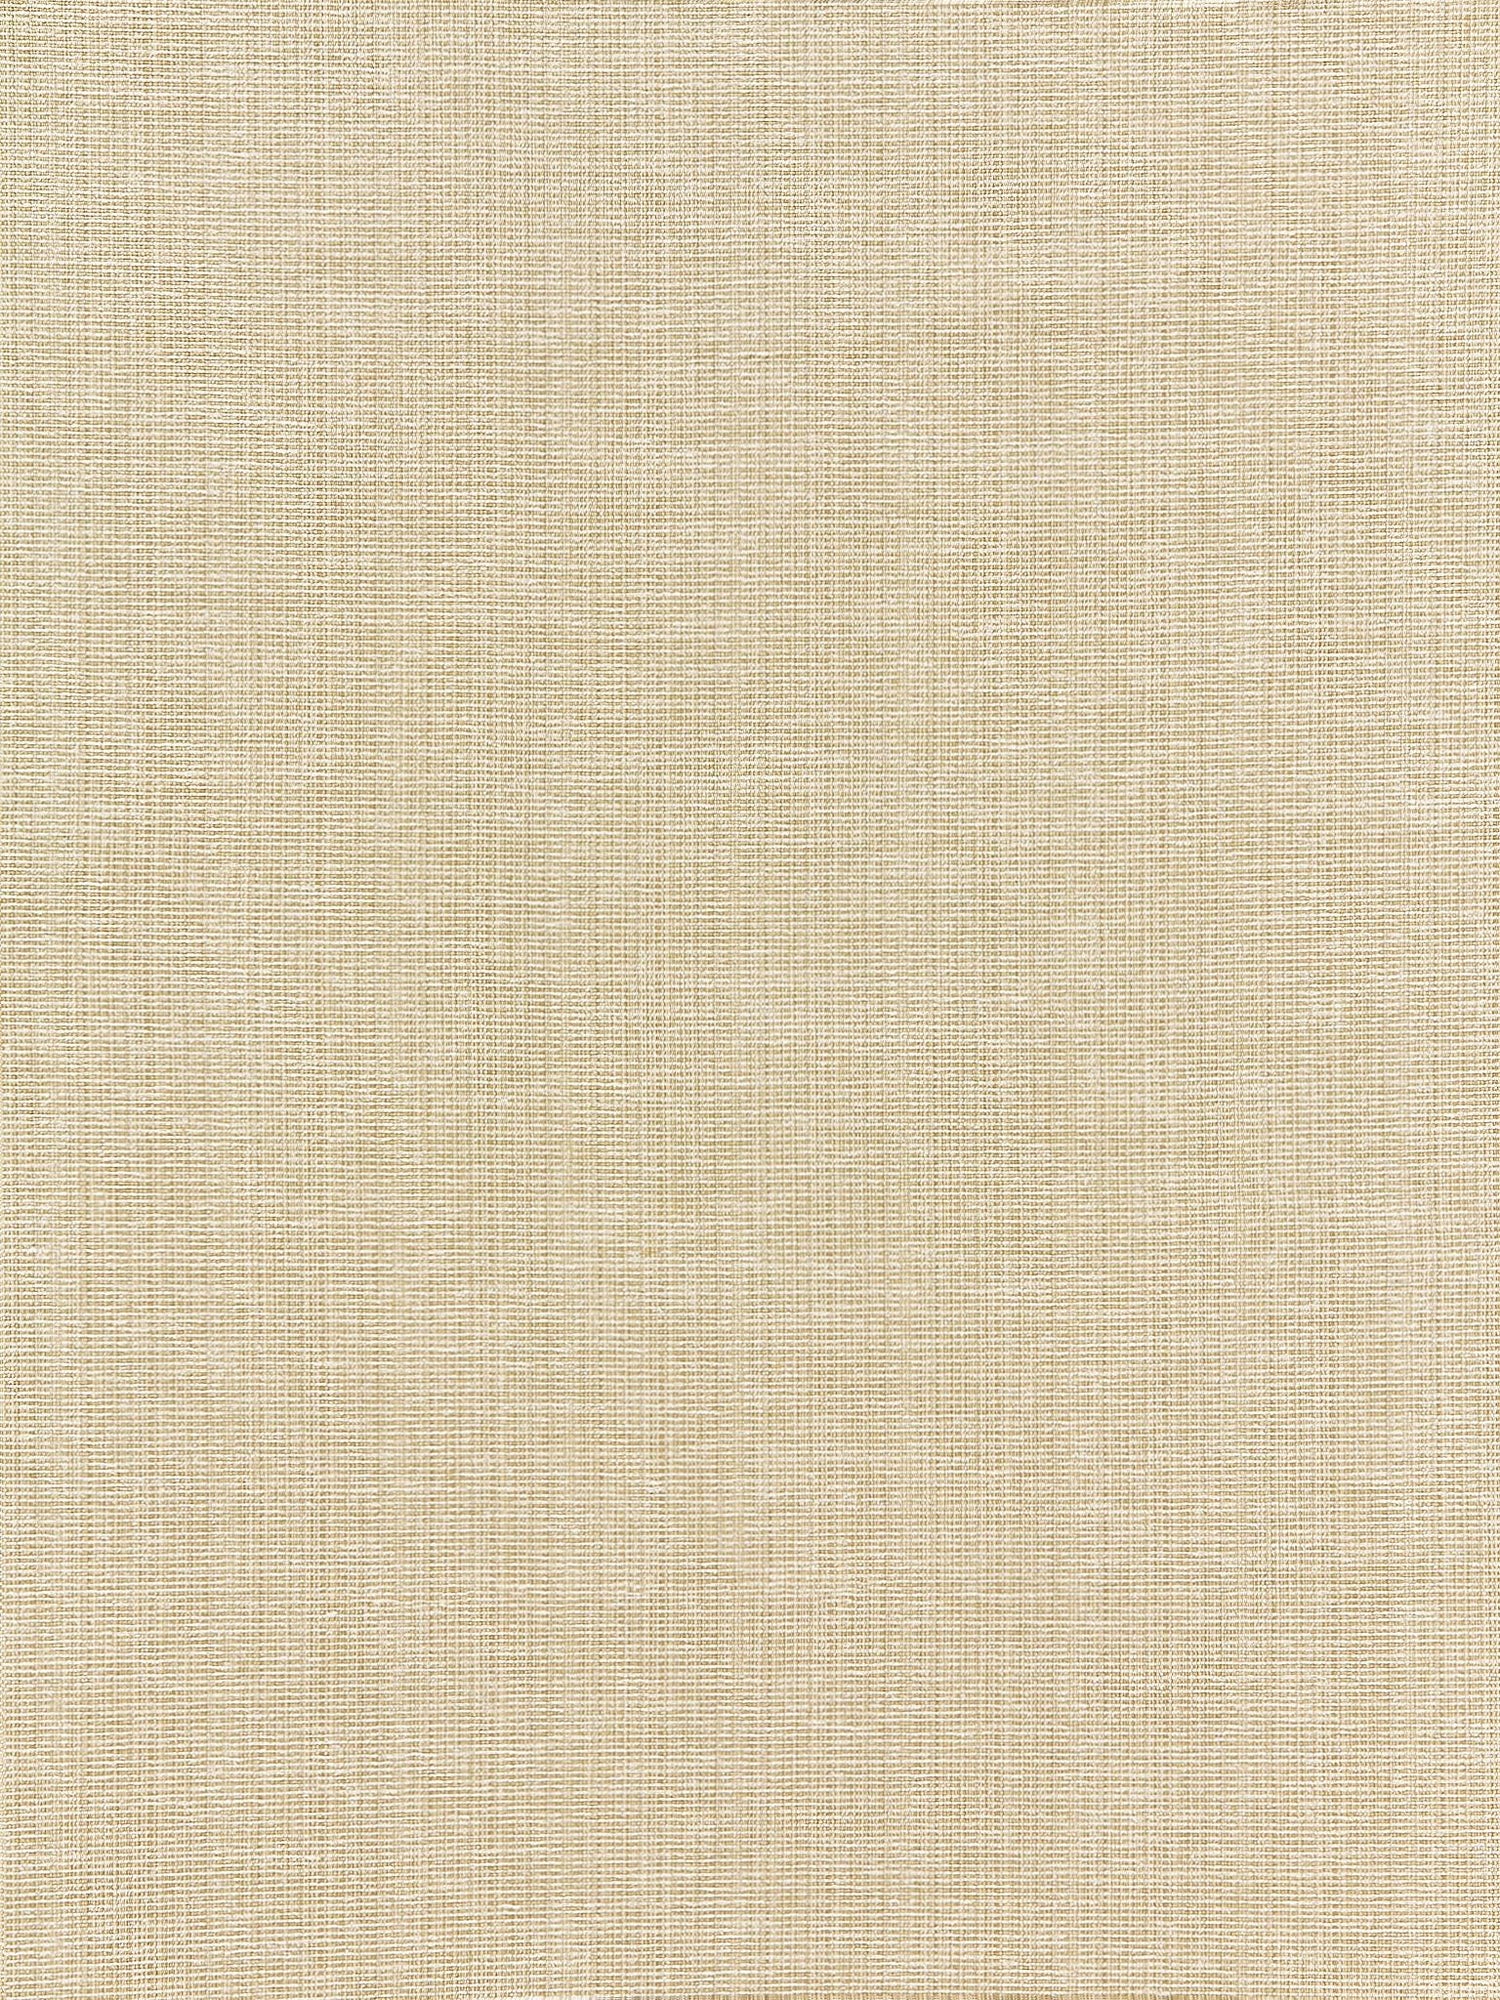 Thompson Chenille fabric in wheat color - pattern number BK 0002K65114 - by Scalamandre in the Old World Weavers collection